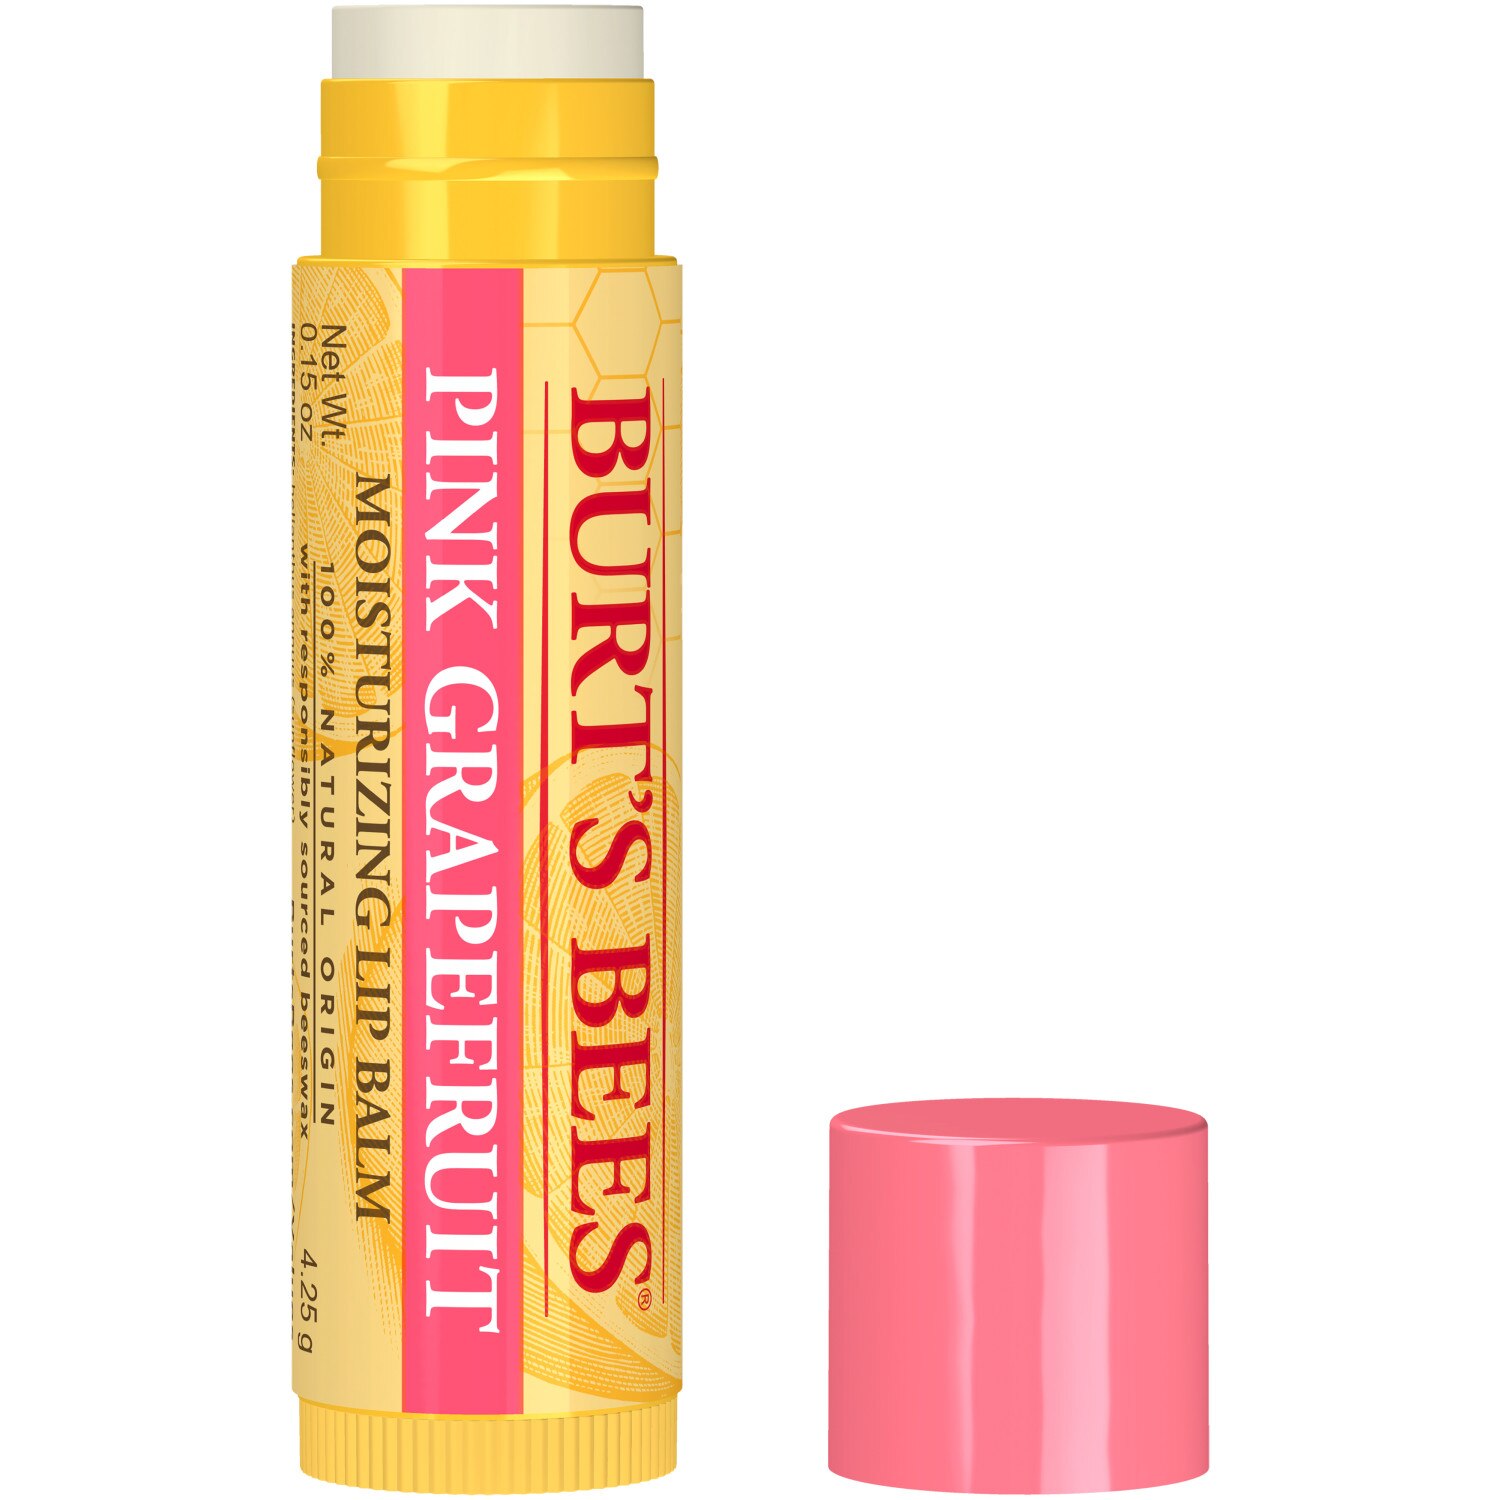 Burt's Bees 100% Natural Moisturizing Lip Balm, Pink Grapefruit with Beeswax & Fruit Extracts